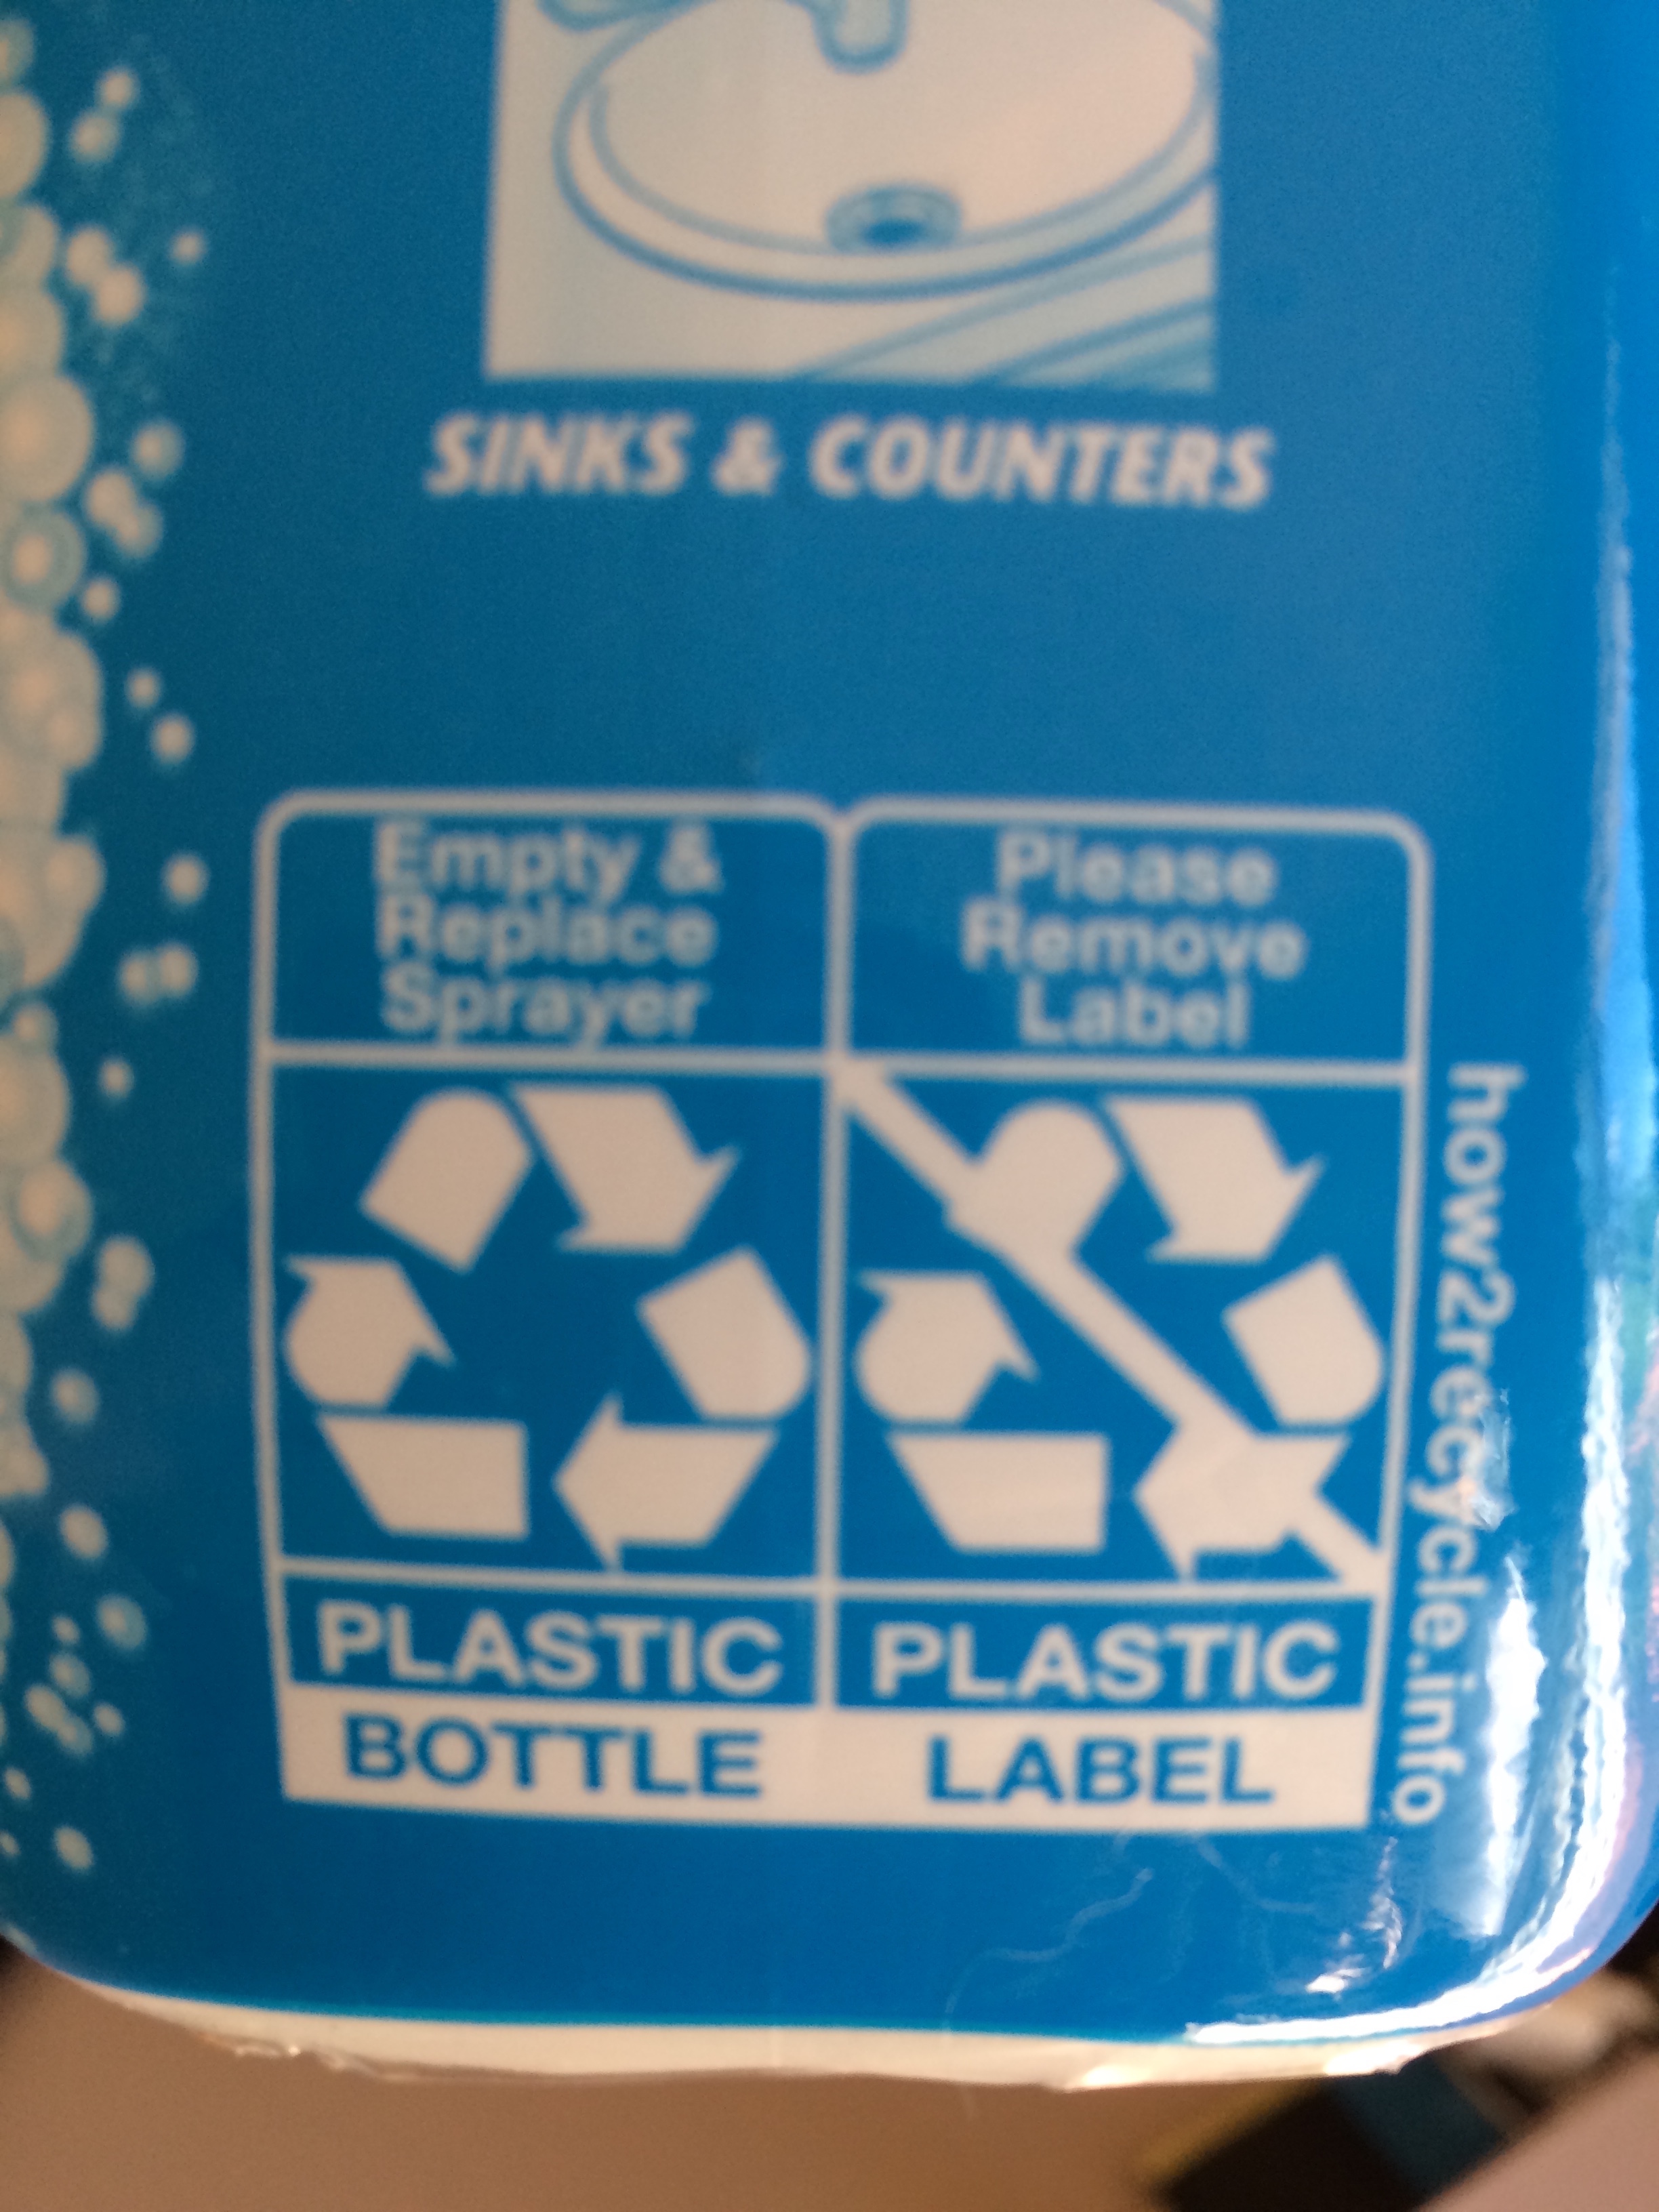 Plastic Label Recycling